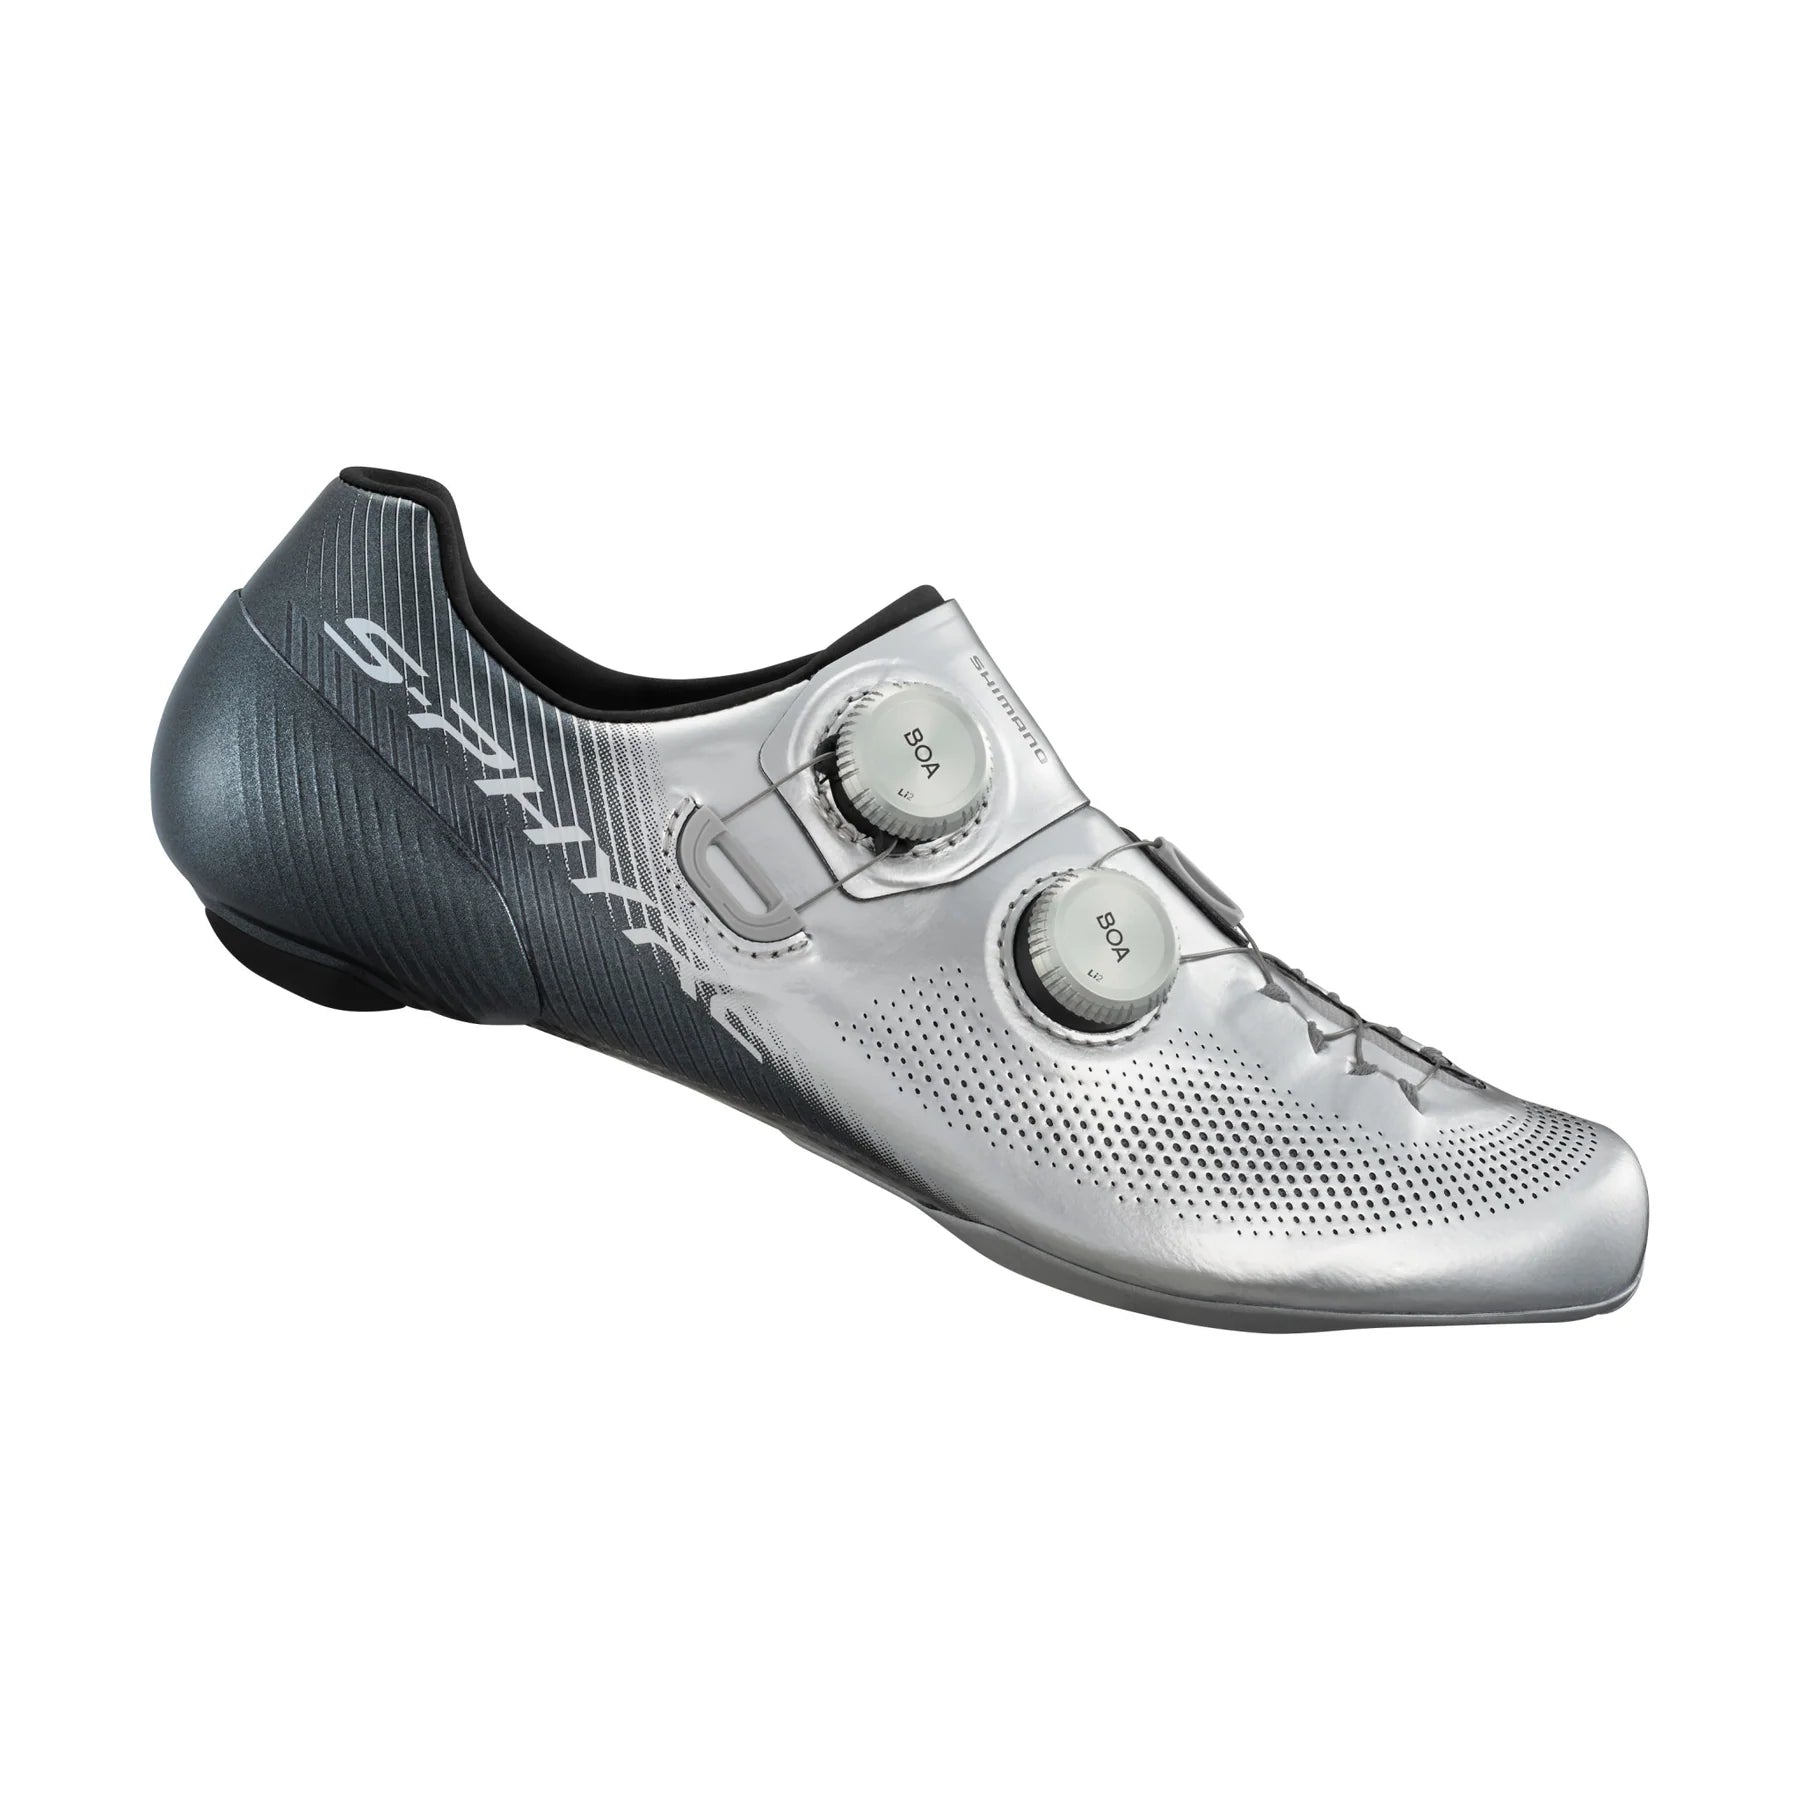 SHIMANO RC903S SHOES (SPECIAL EDITION)